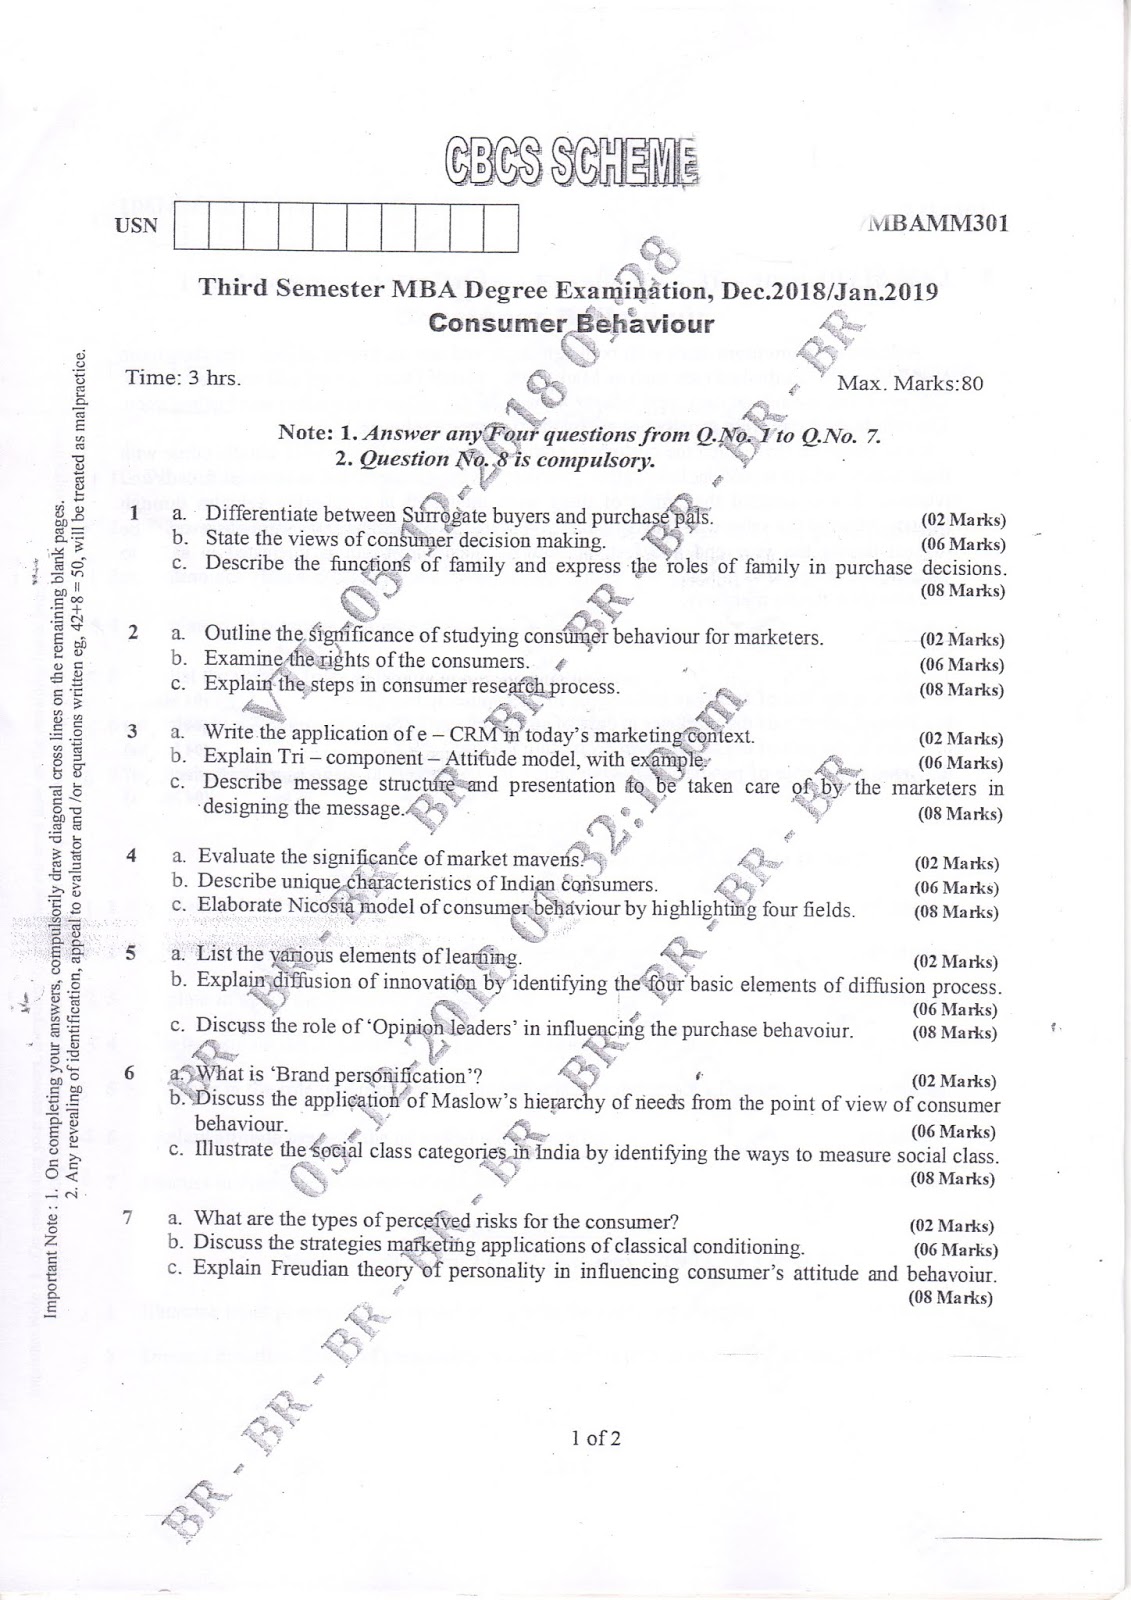 operations research vtu question papers